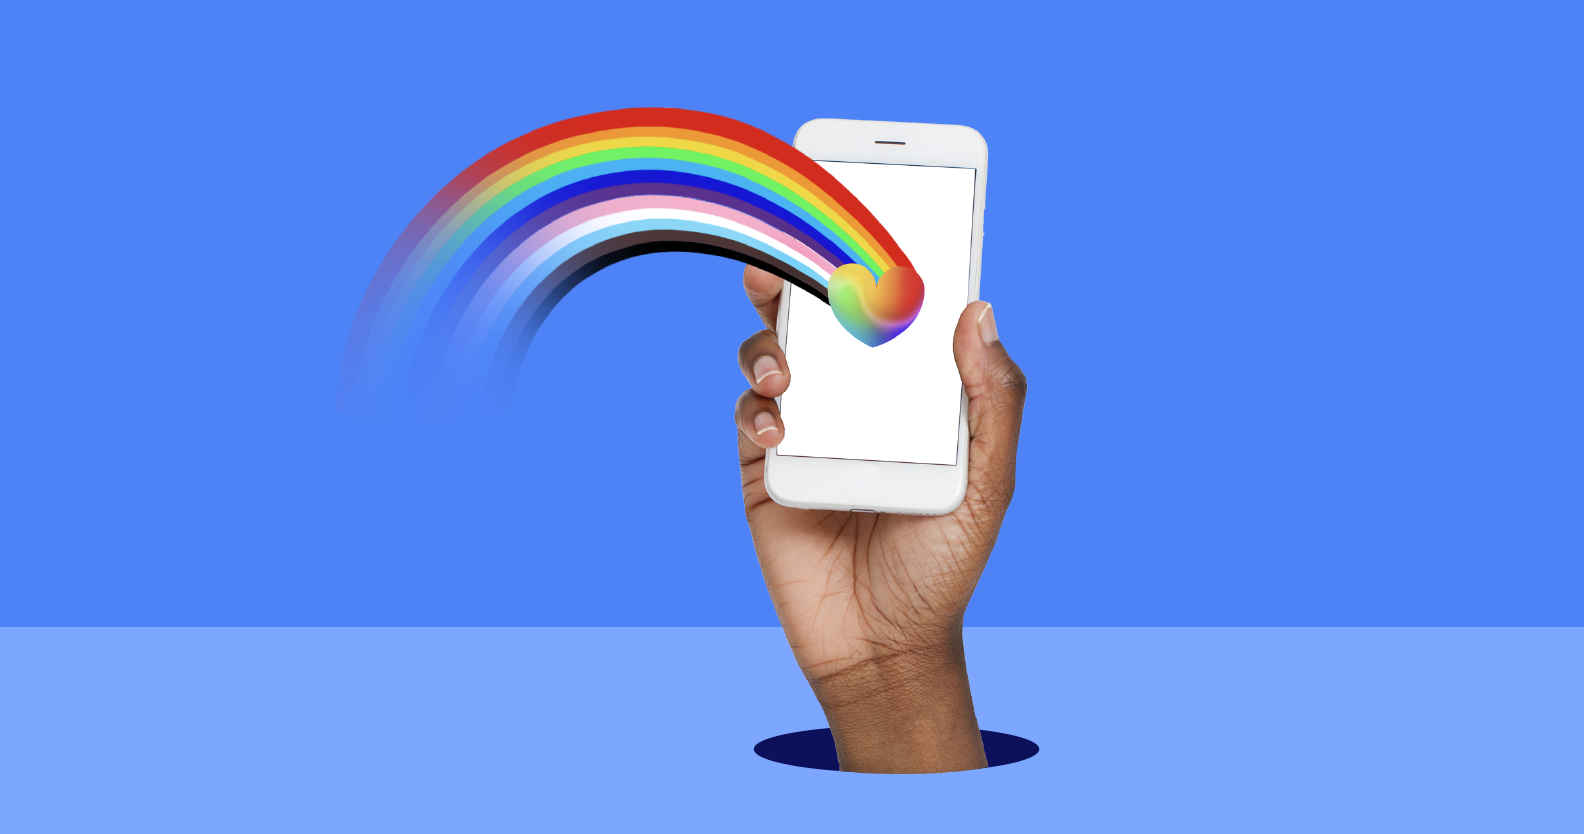 Telemedicine is improving healthcare for the LGBTQ+ community